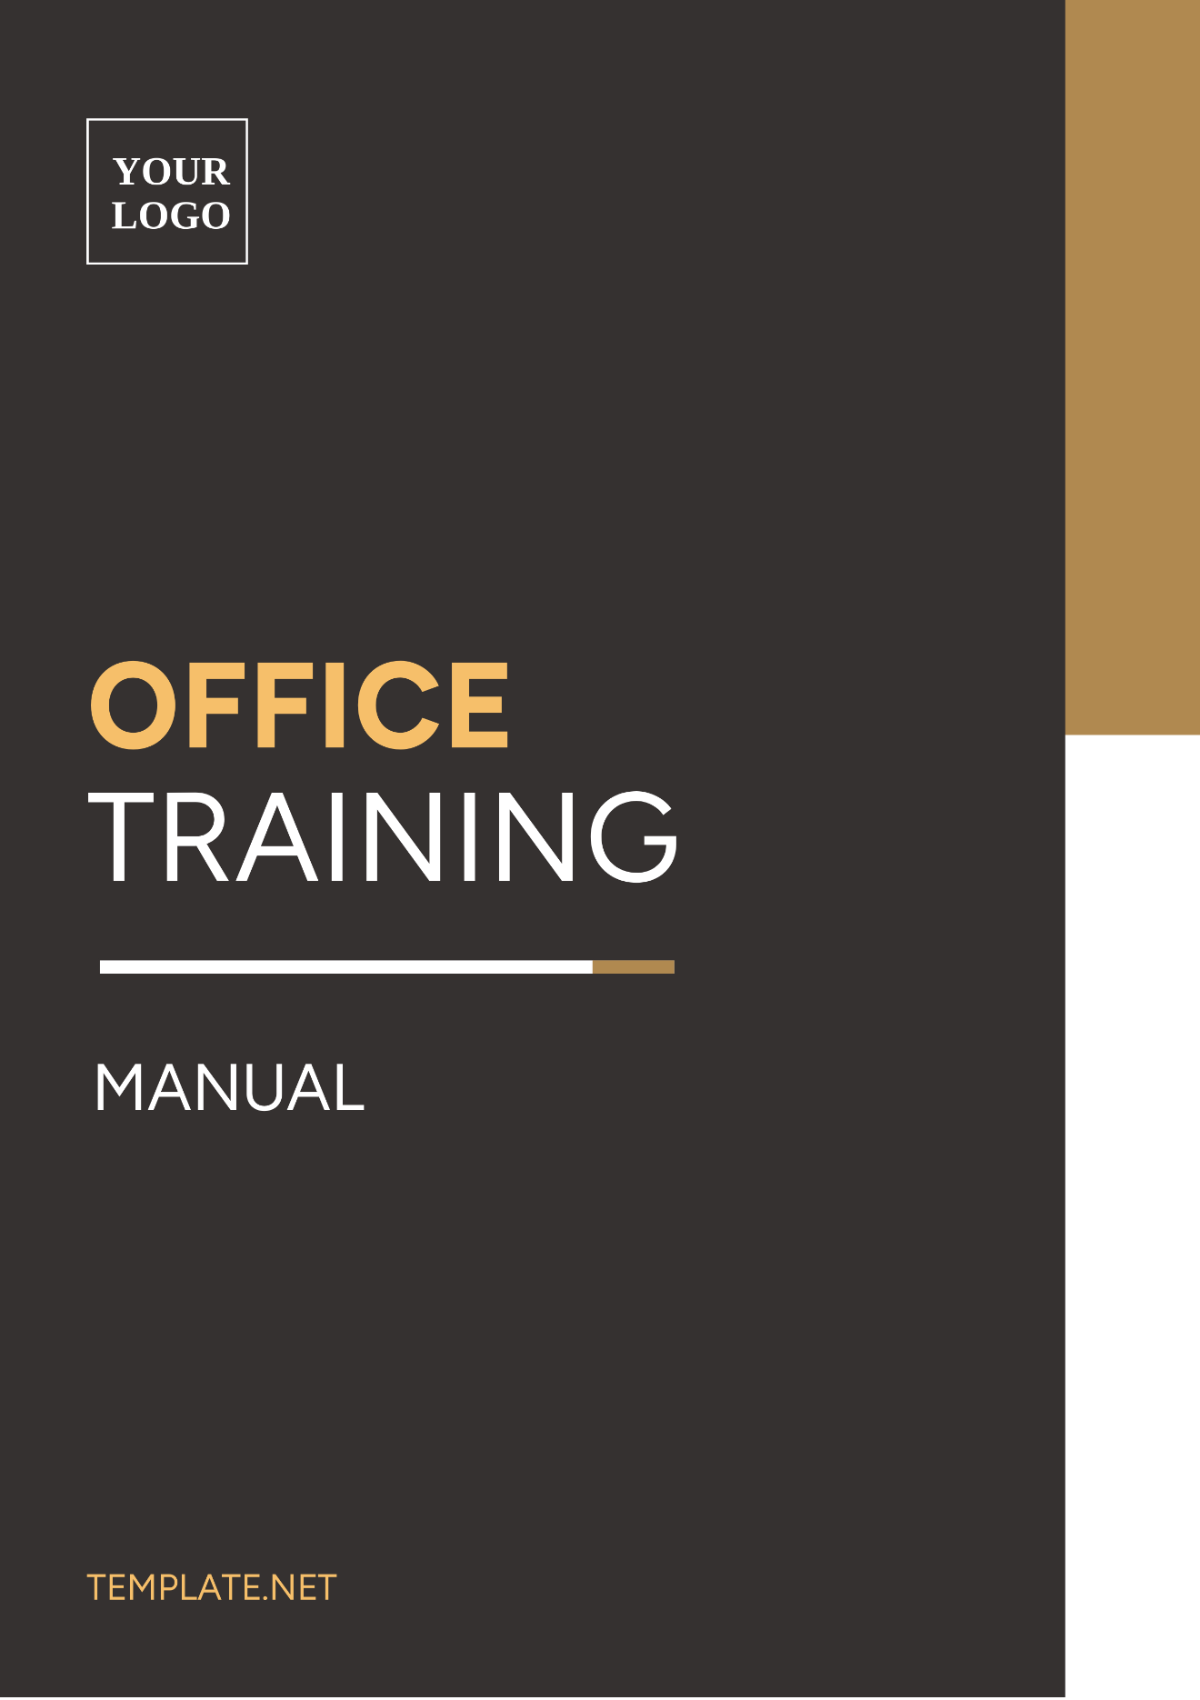  Office Training Manual Template